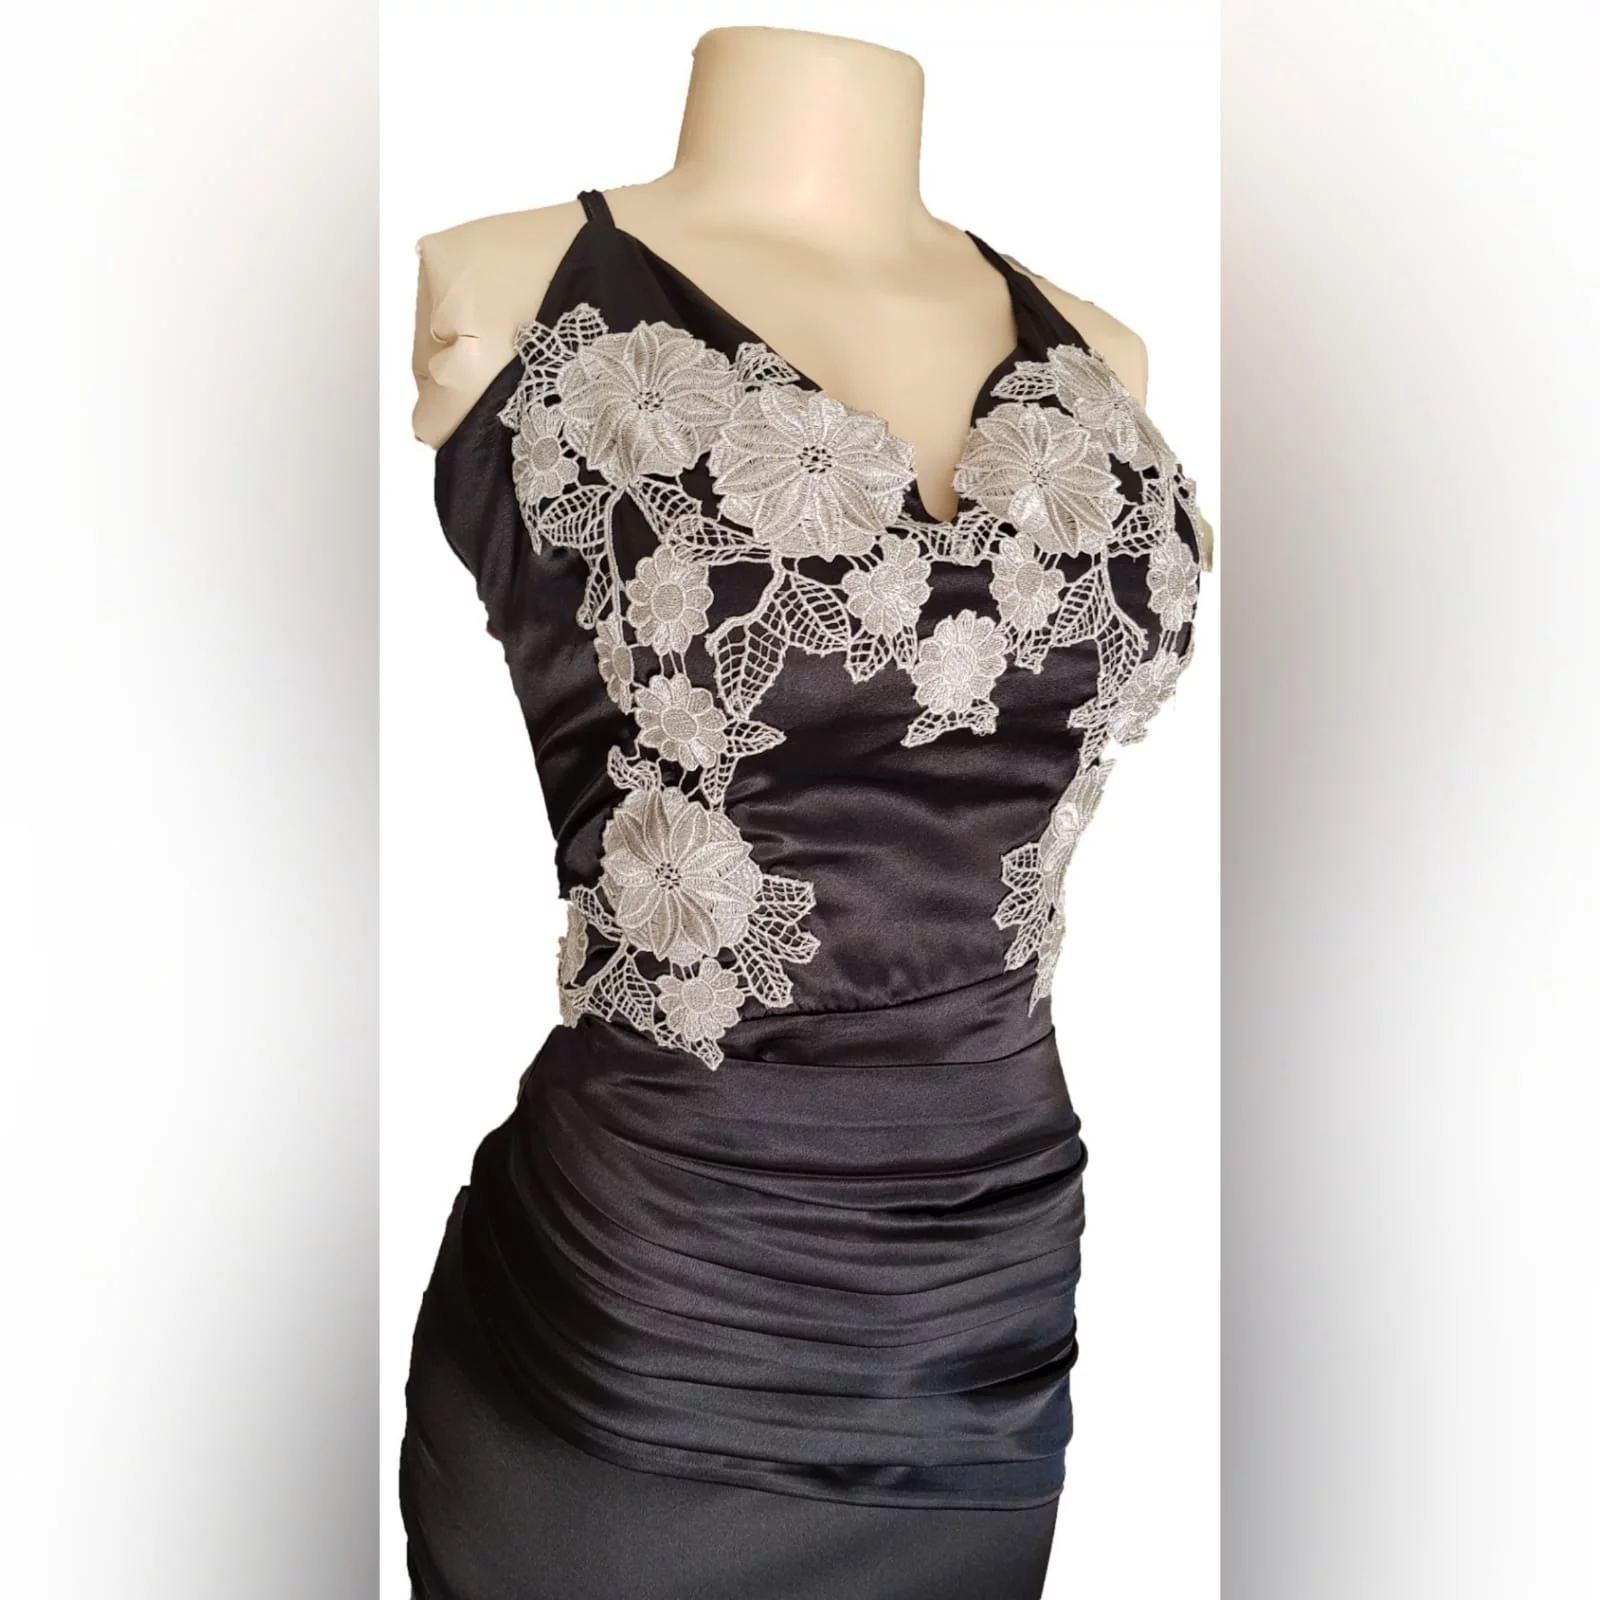 Black satin long fitted prom dress 6 a black satin long fitted prom dress with silver lace detail, will add an elegance to your special event.